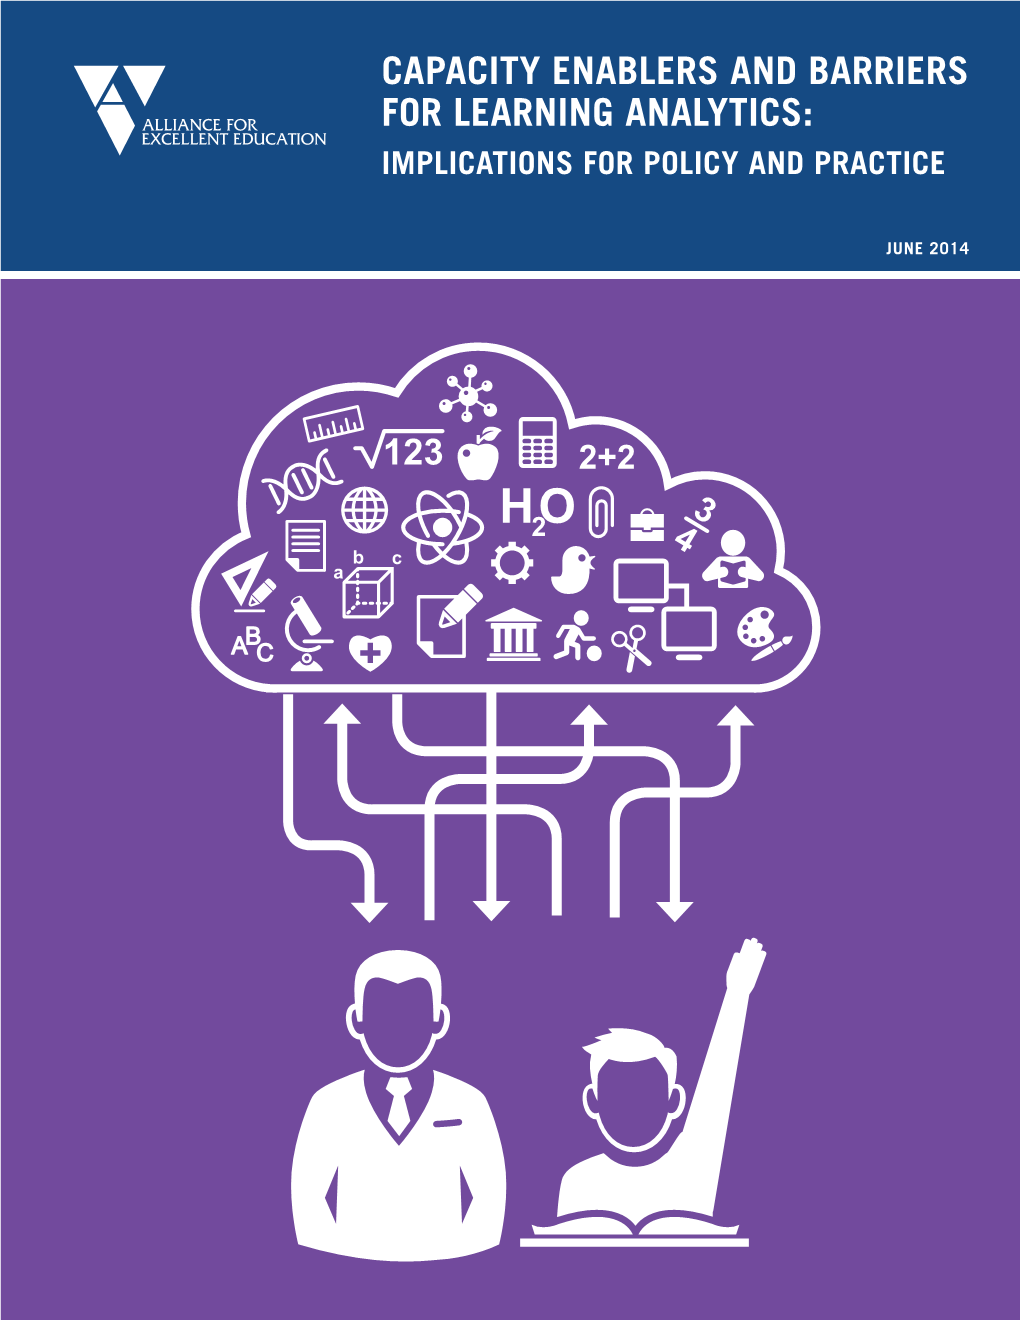 Capacity Enablers and Barriers for Learning Analytics: Implications for Policy and Practice